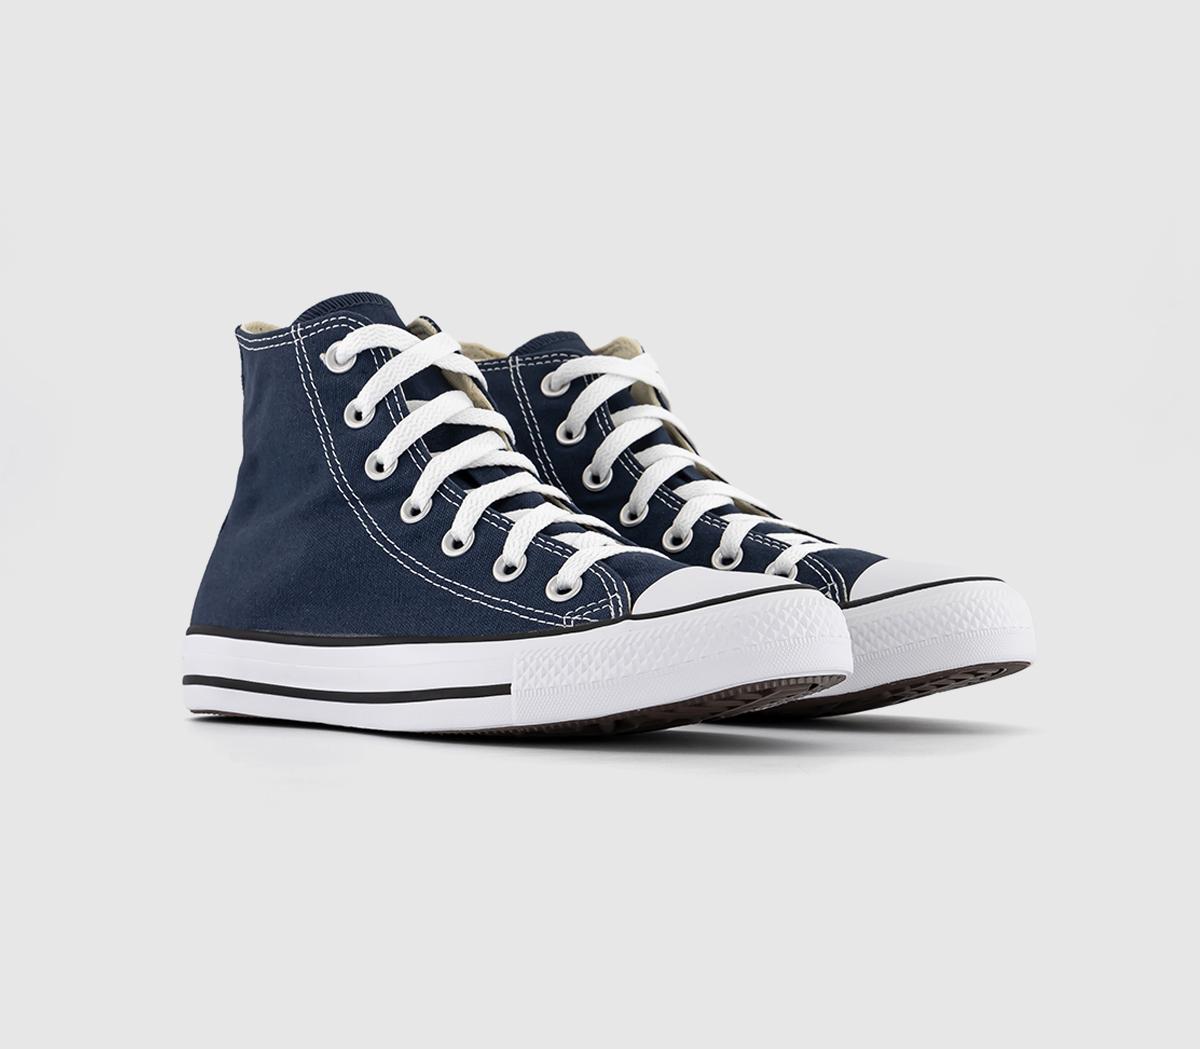 Mens Converse All Star Hi Canvas Trainers In Navy Blue And White, 9